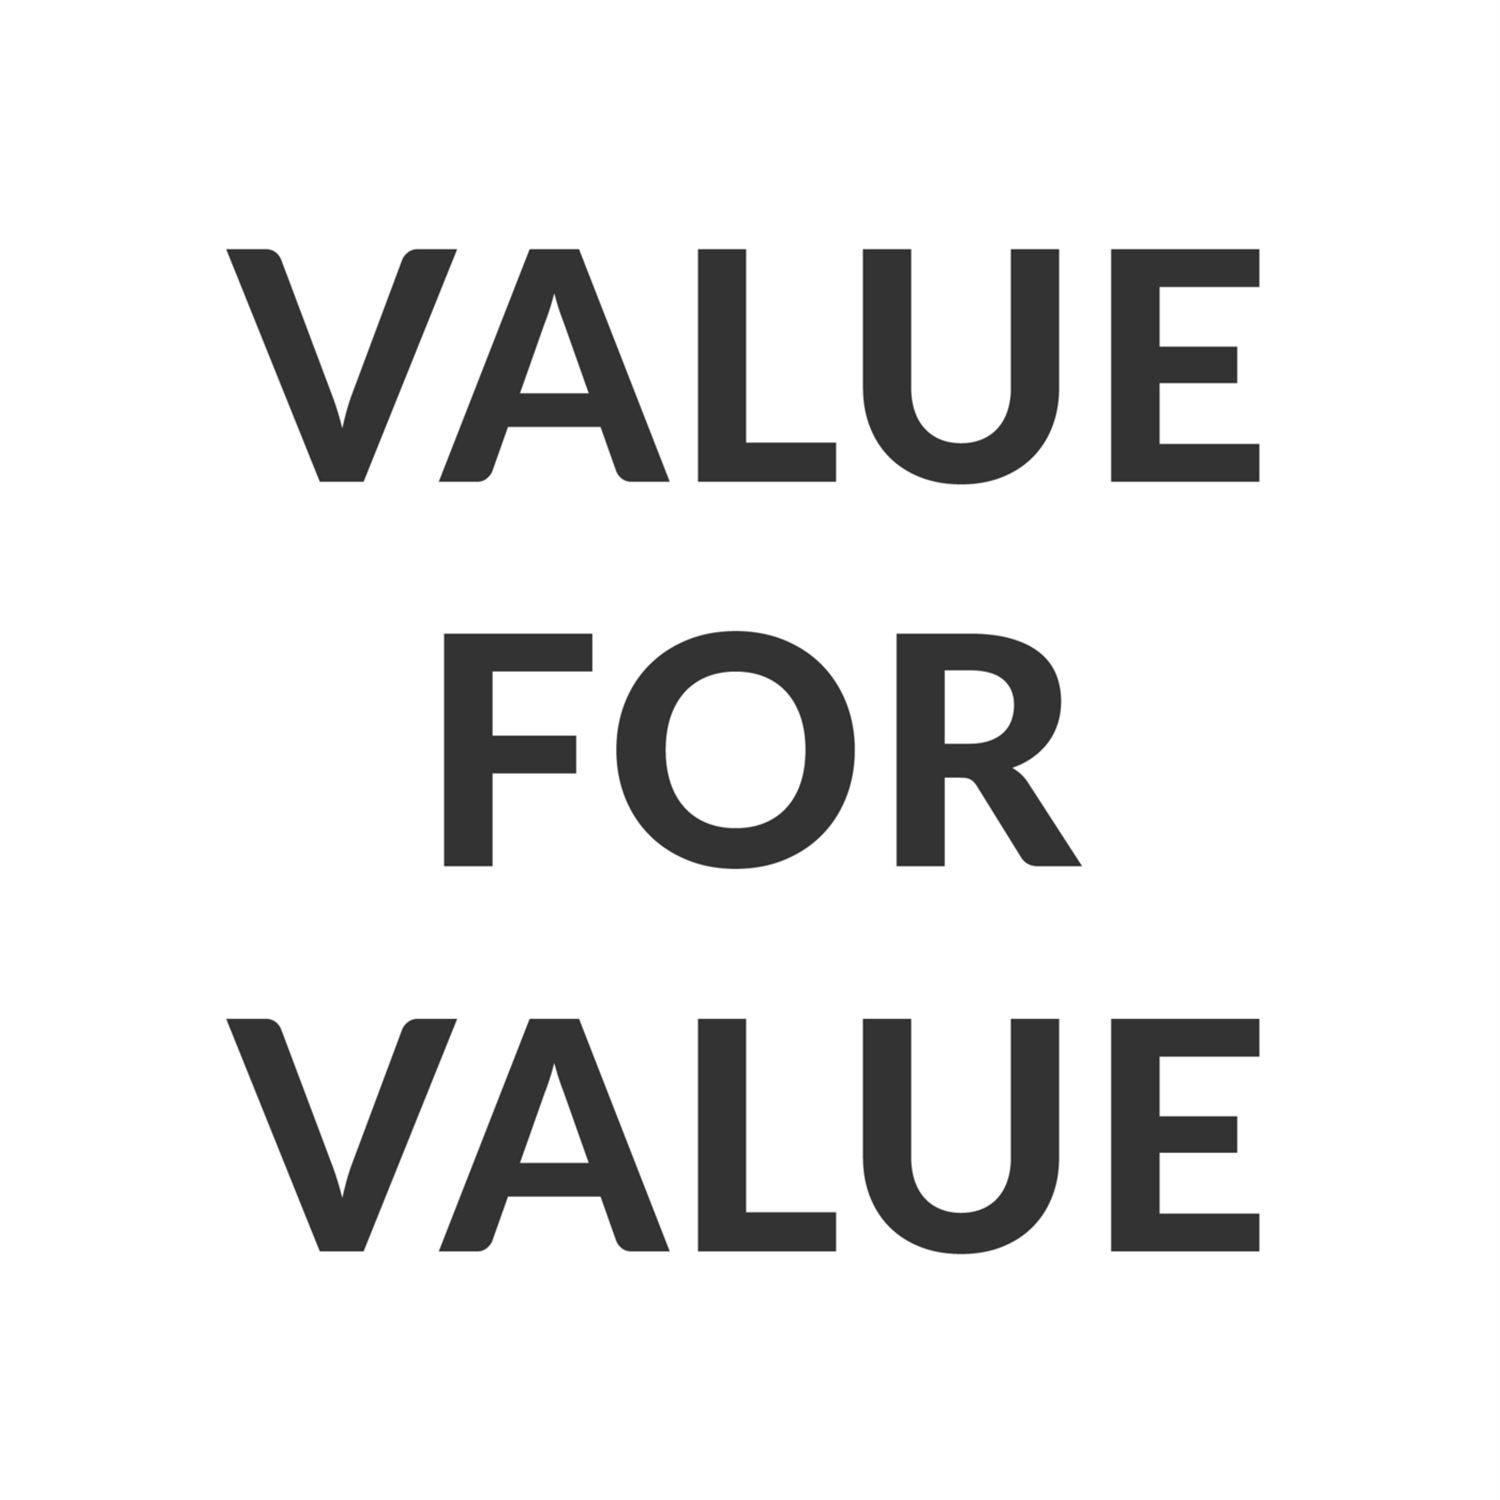 Value for value: we're not influenced by anyone